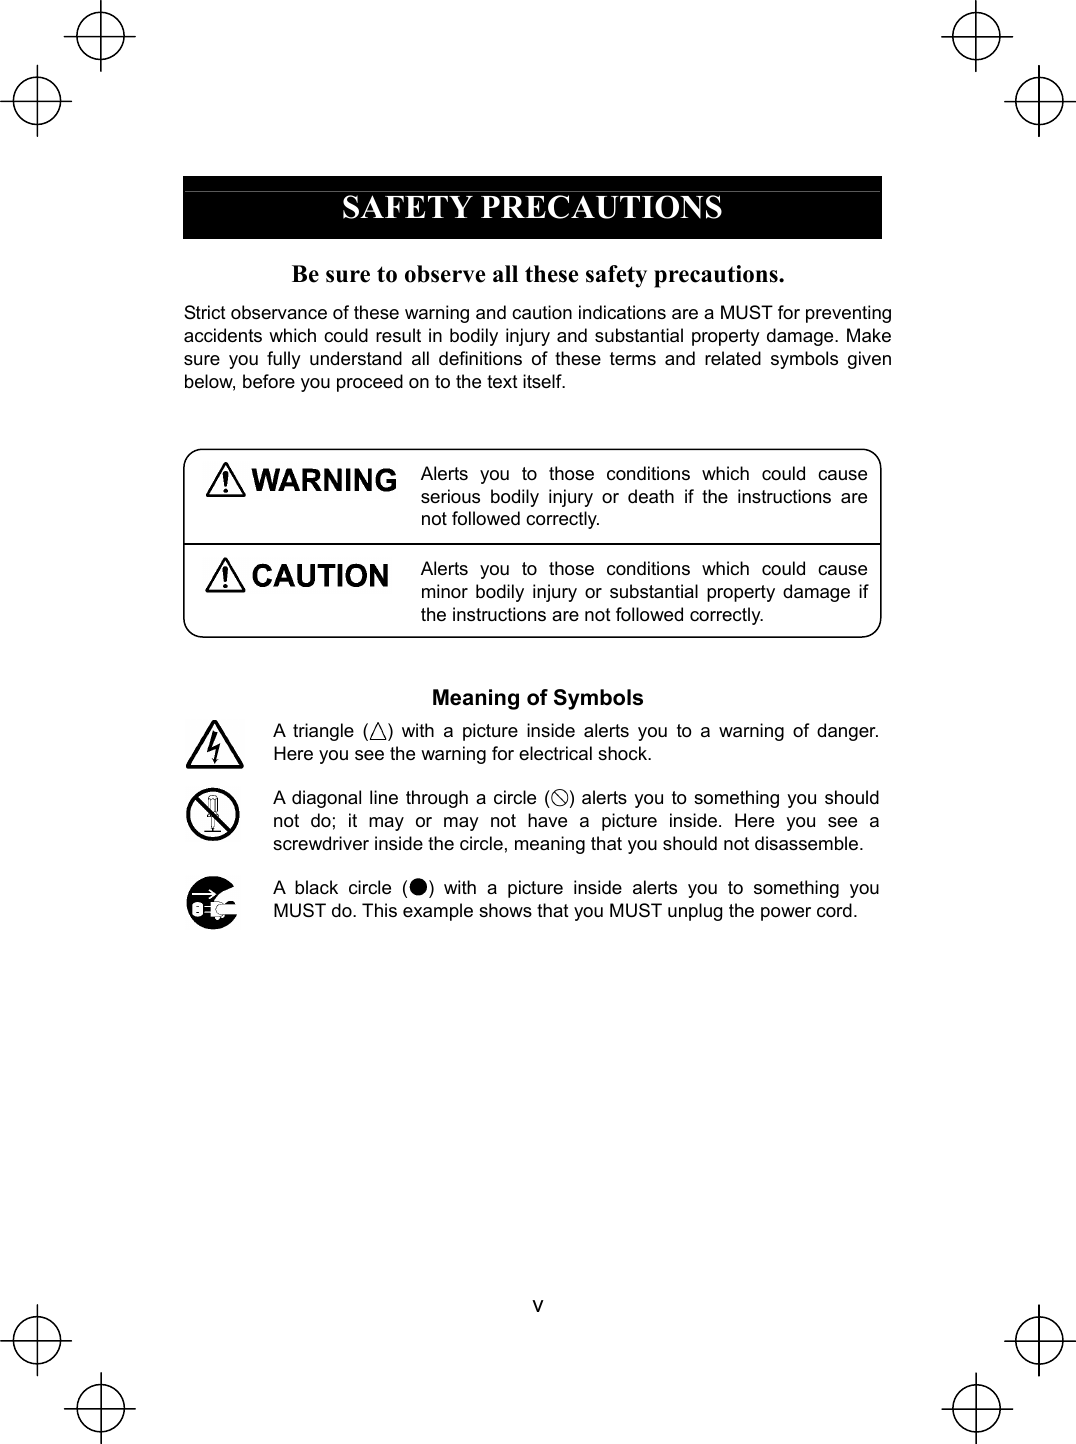  v  SAFETY PRECAUTIONS  Be sure to observe all these safety precautions. Strict observance of these warning and caution indications are a MUST for preventing accidents which could result in bodily injury and substantial property damage. Make sure you fully understand all definitions of these terms and related symbols given below, before you proceed on to the text itself.   Alerts you to those conditions which could cause serious bodily injury or death if the instructions are not followed correctly.  Alerts you to those conditions which could cause minor bodily injury or substantial property damage if the instructions are not followed correctly.  Meaning of Symbols  A triangle ( ) with a picture inside alerts you to a warning of danger. Here you see the warning for electrical shock.    A diagonal line through a circle ( ) alerts you to something you should not do; it may or may not have a picture inside. Here you see a screwdriver inside the circle, meaning that you should not disassemble.  A black circle ( ) with a picture inside alerts you to something you MUST do. This example shows that you MUST unplug the power cord.  